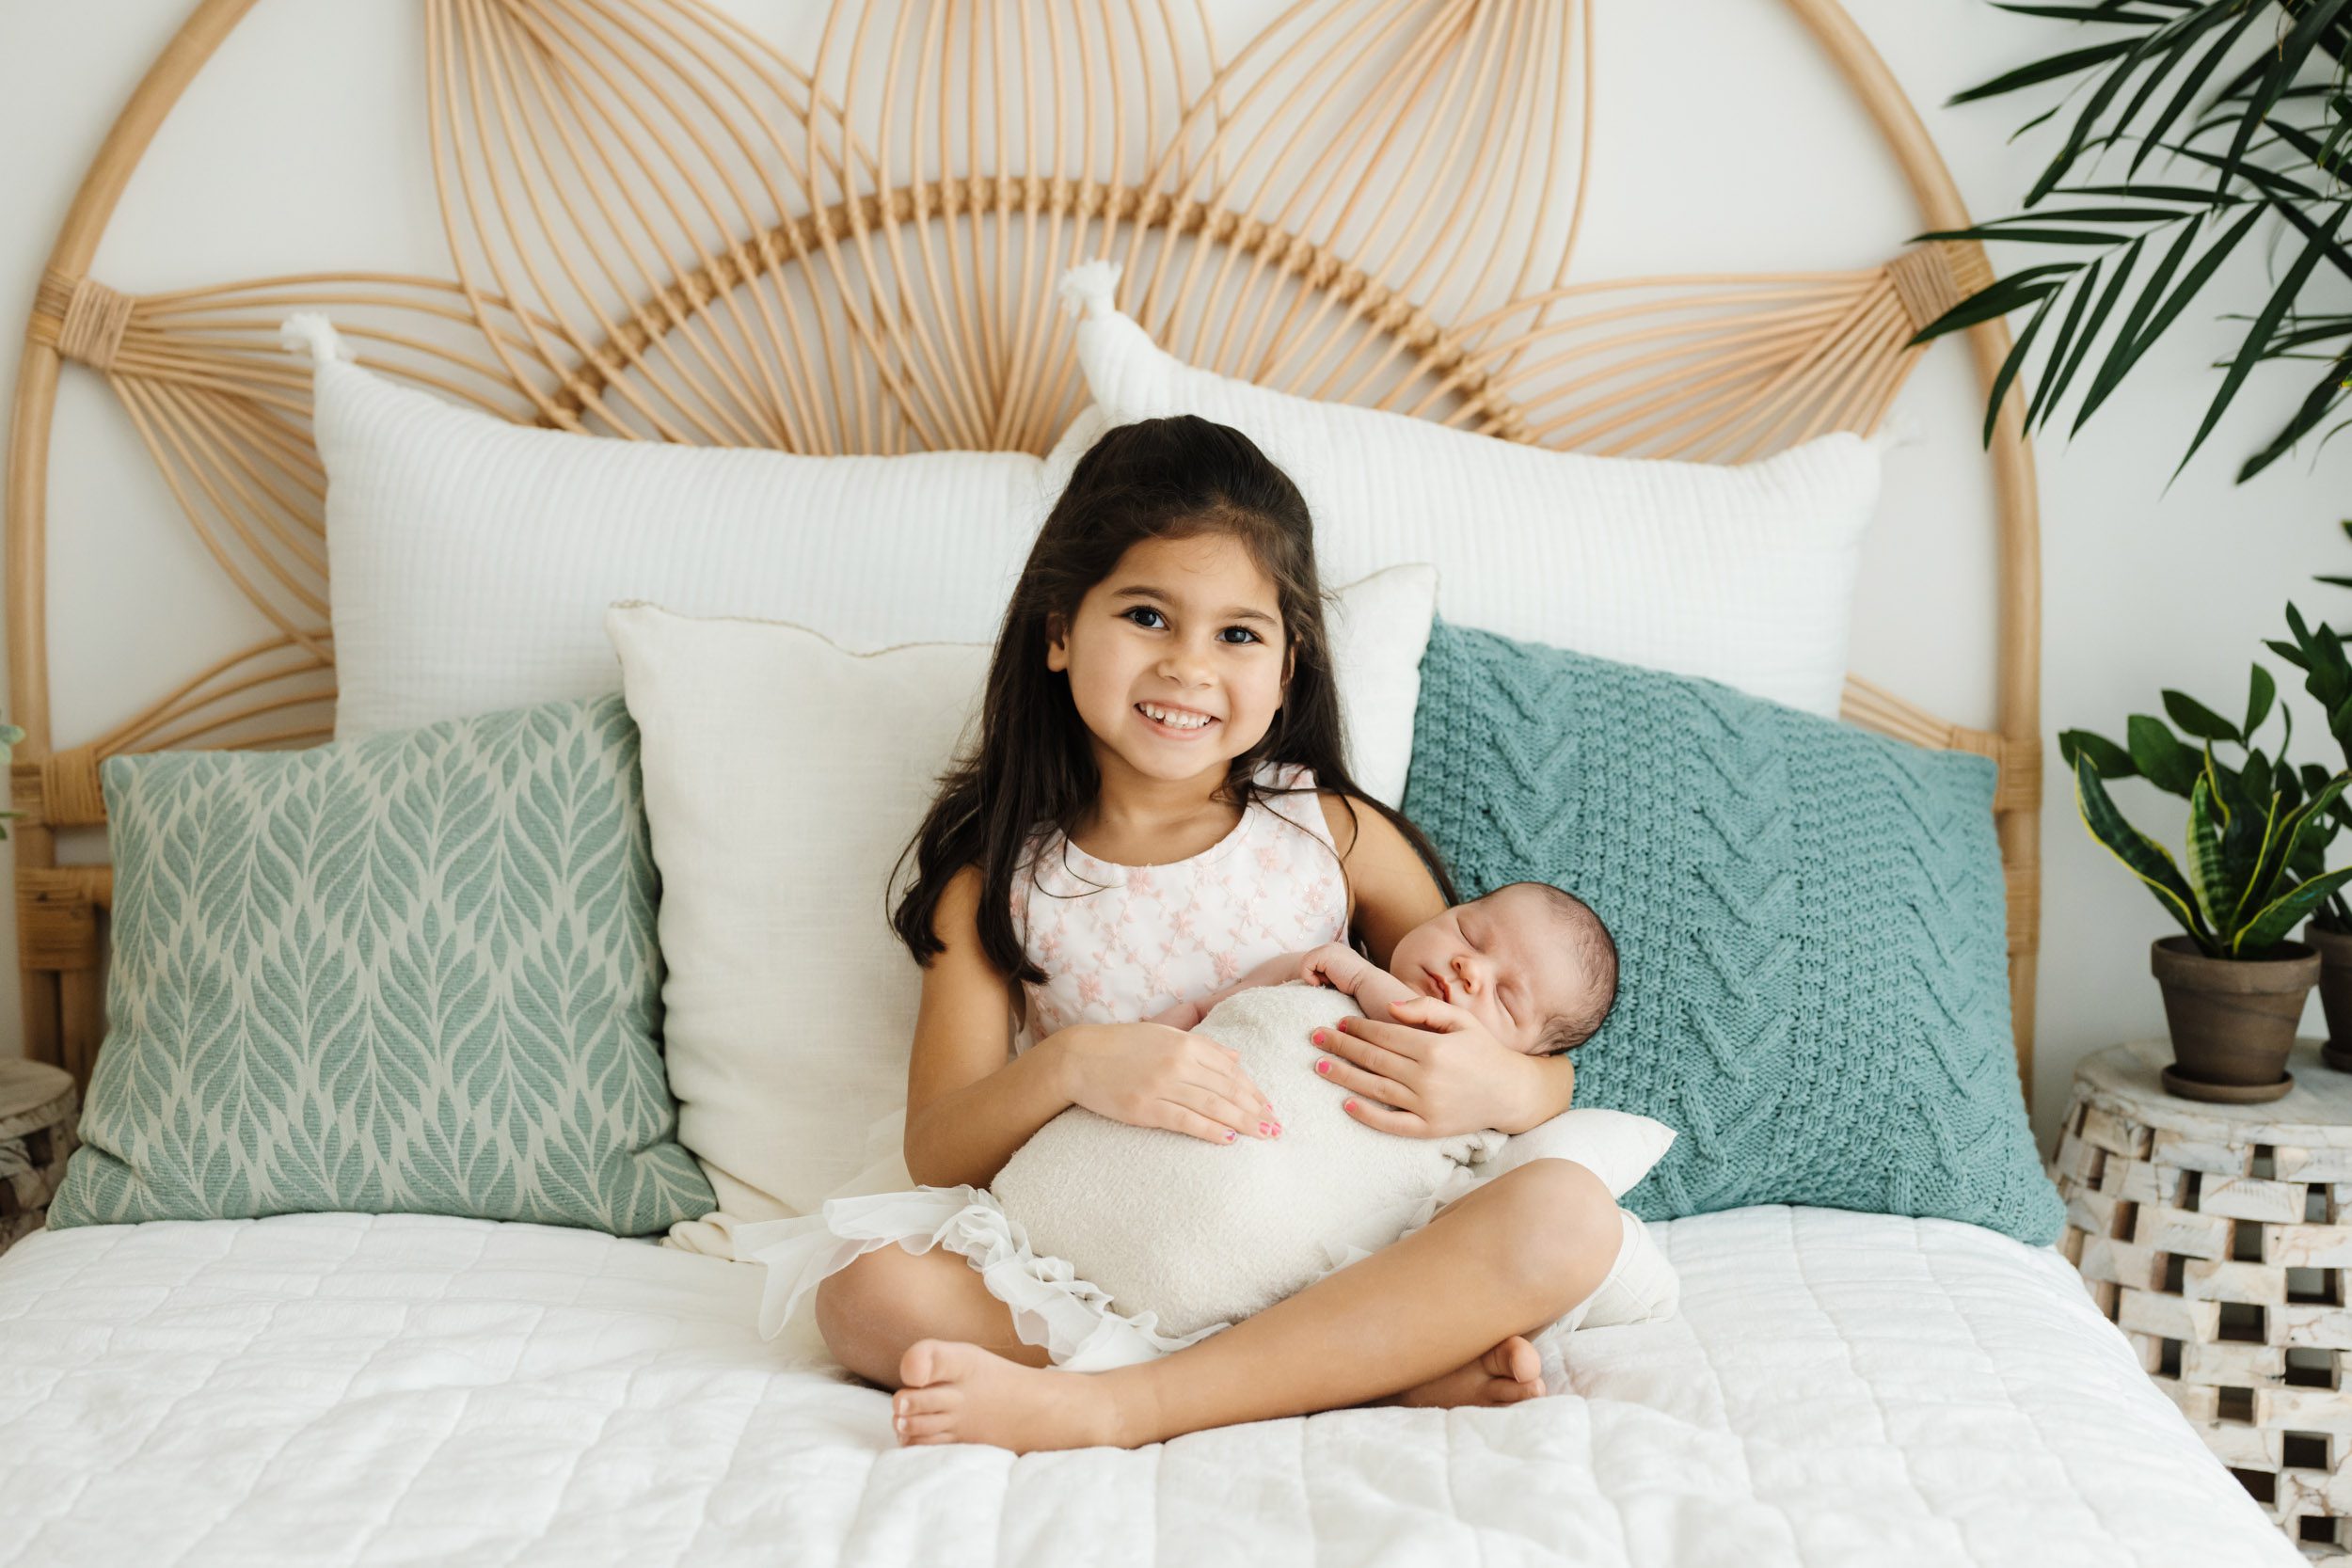 a young sibling sitting on a bed and cradling her baby brother in her arms as she smiles at the camera during a newborn photo session